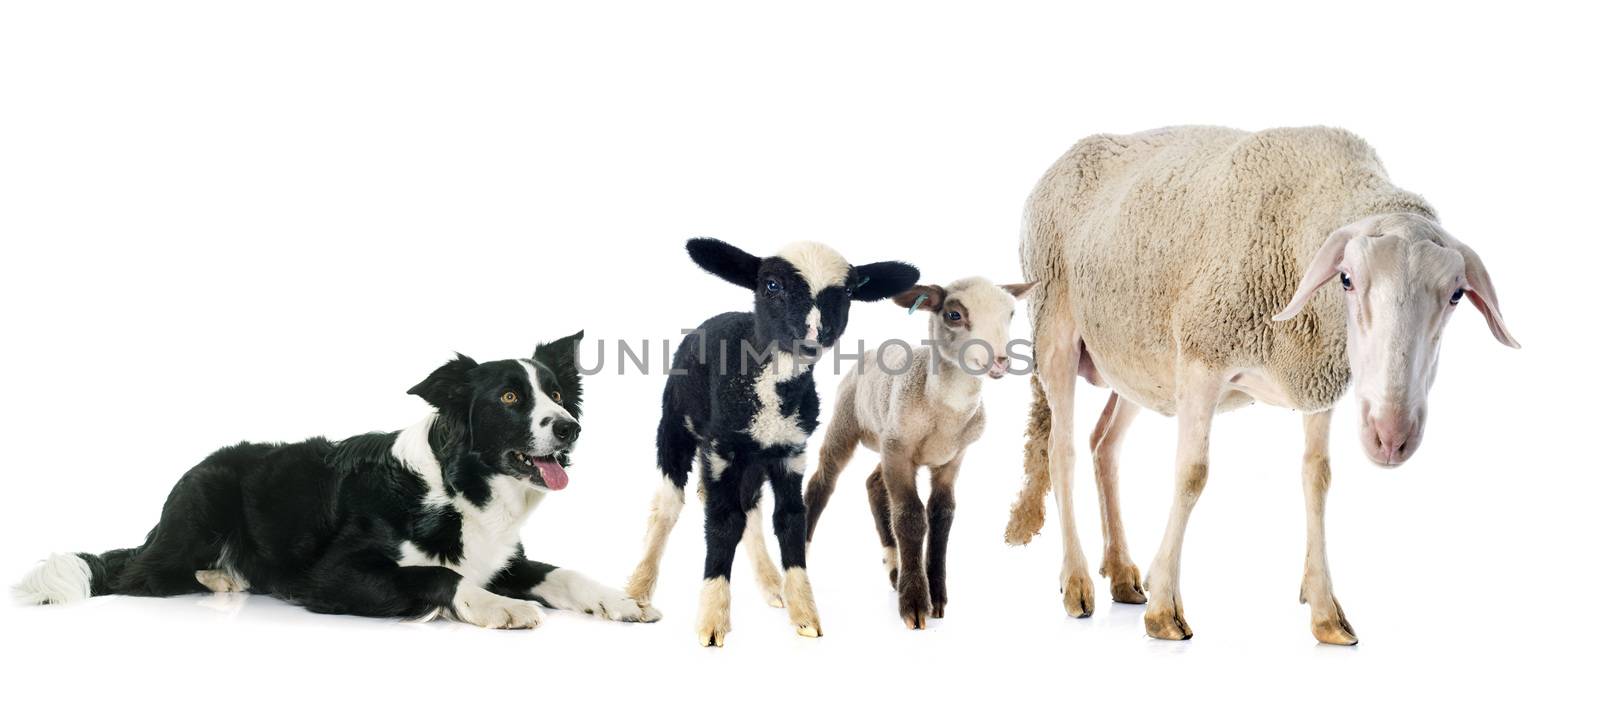 black and white border collie in front of white background